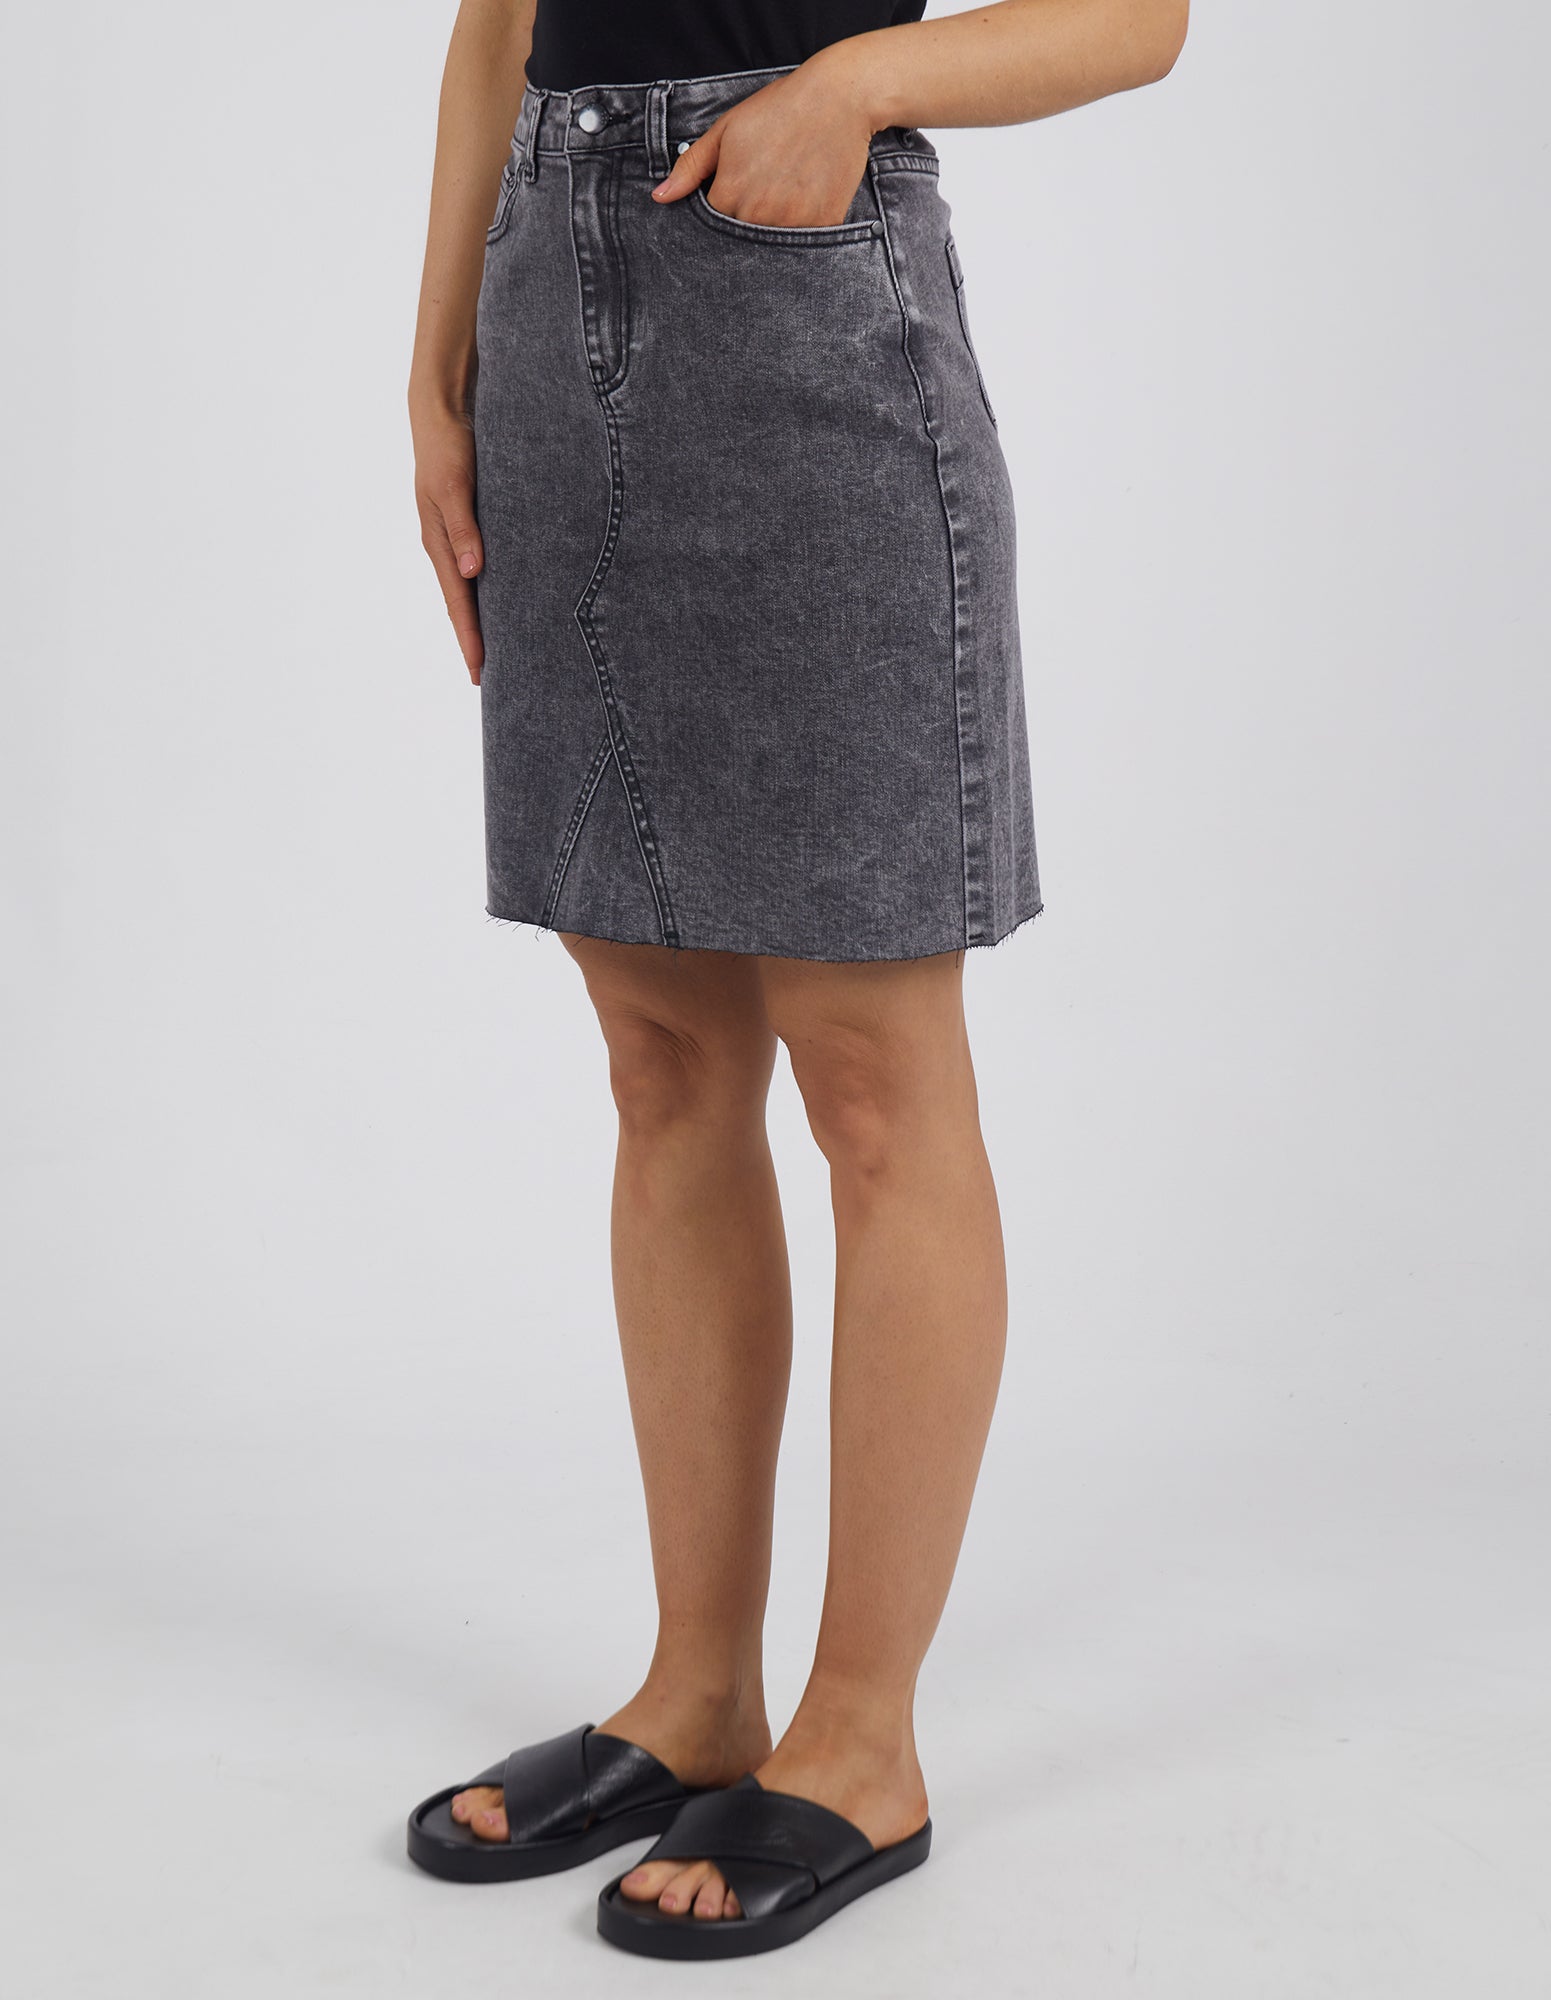 P.A.R.O.S.H. Denim Skirt Girl 3-8 years online on YOOX United States